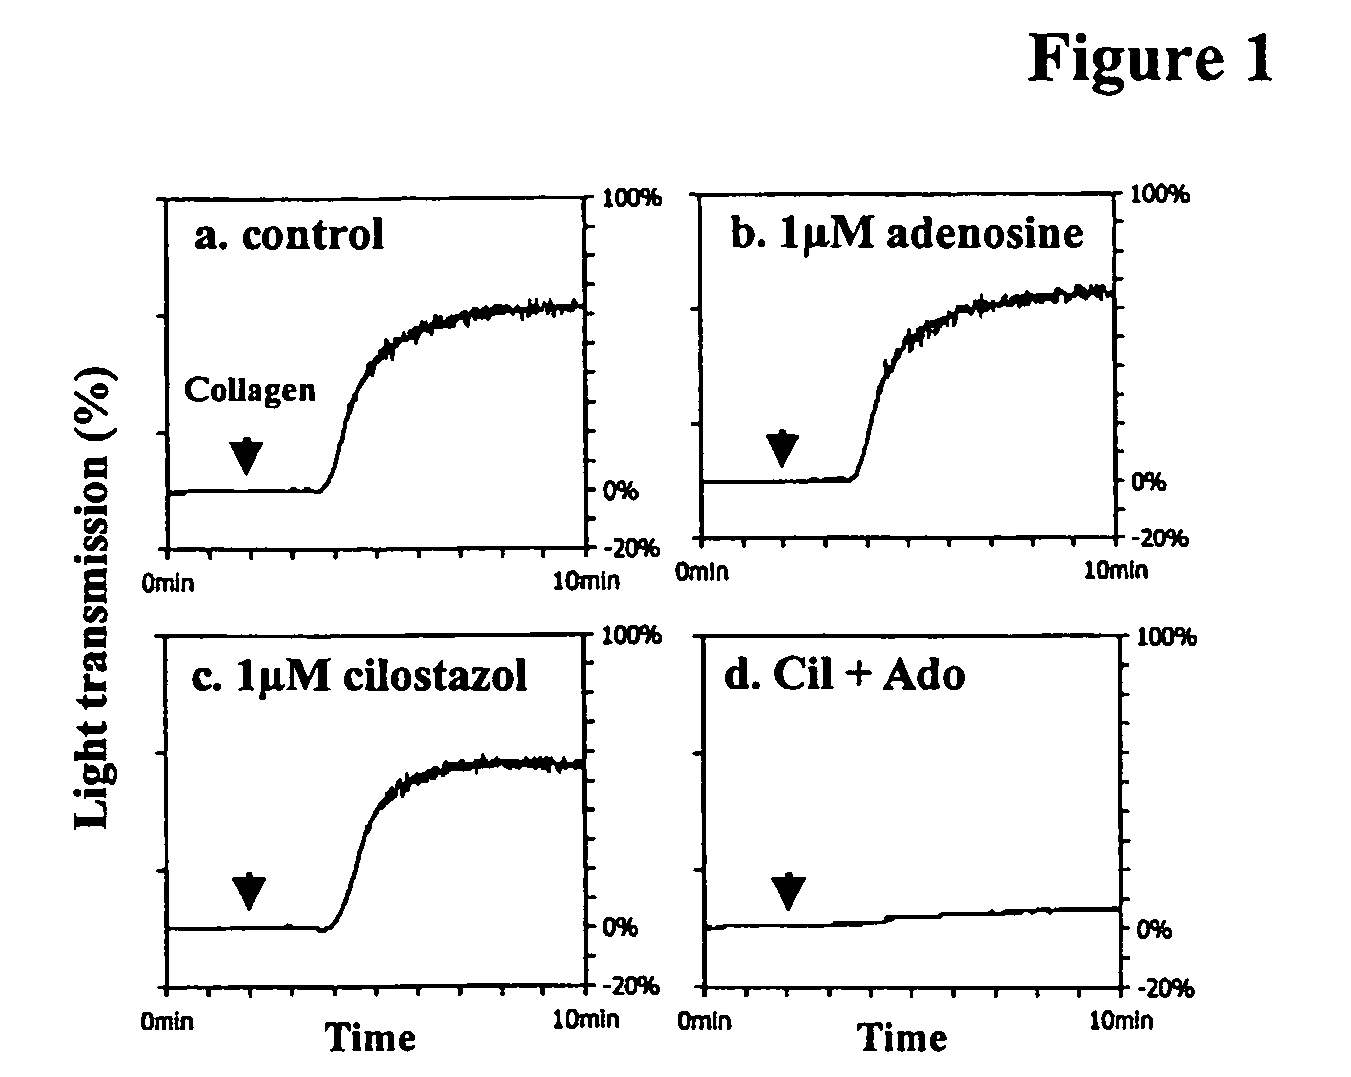 Pharmaceutical compositions comprising a multifunctional phosphodiesterase inhibitor and an adenosine uptake inhibitor